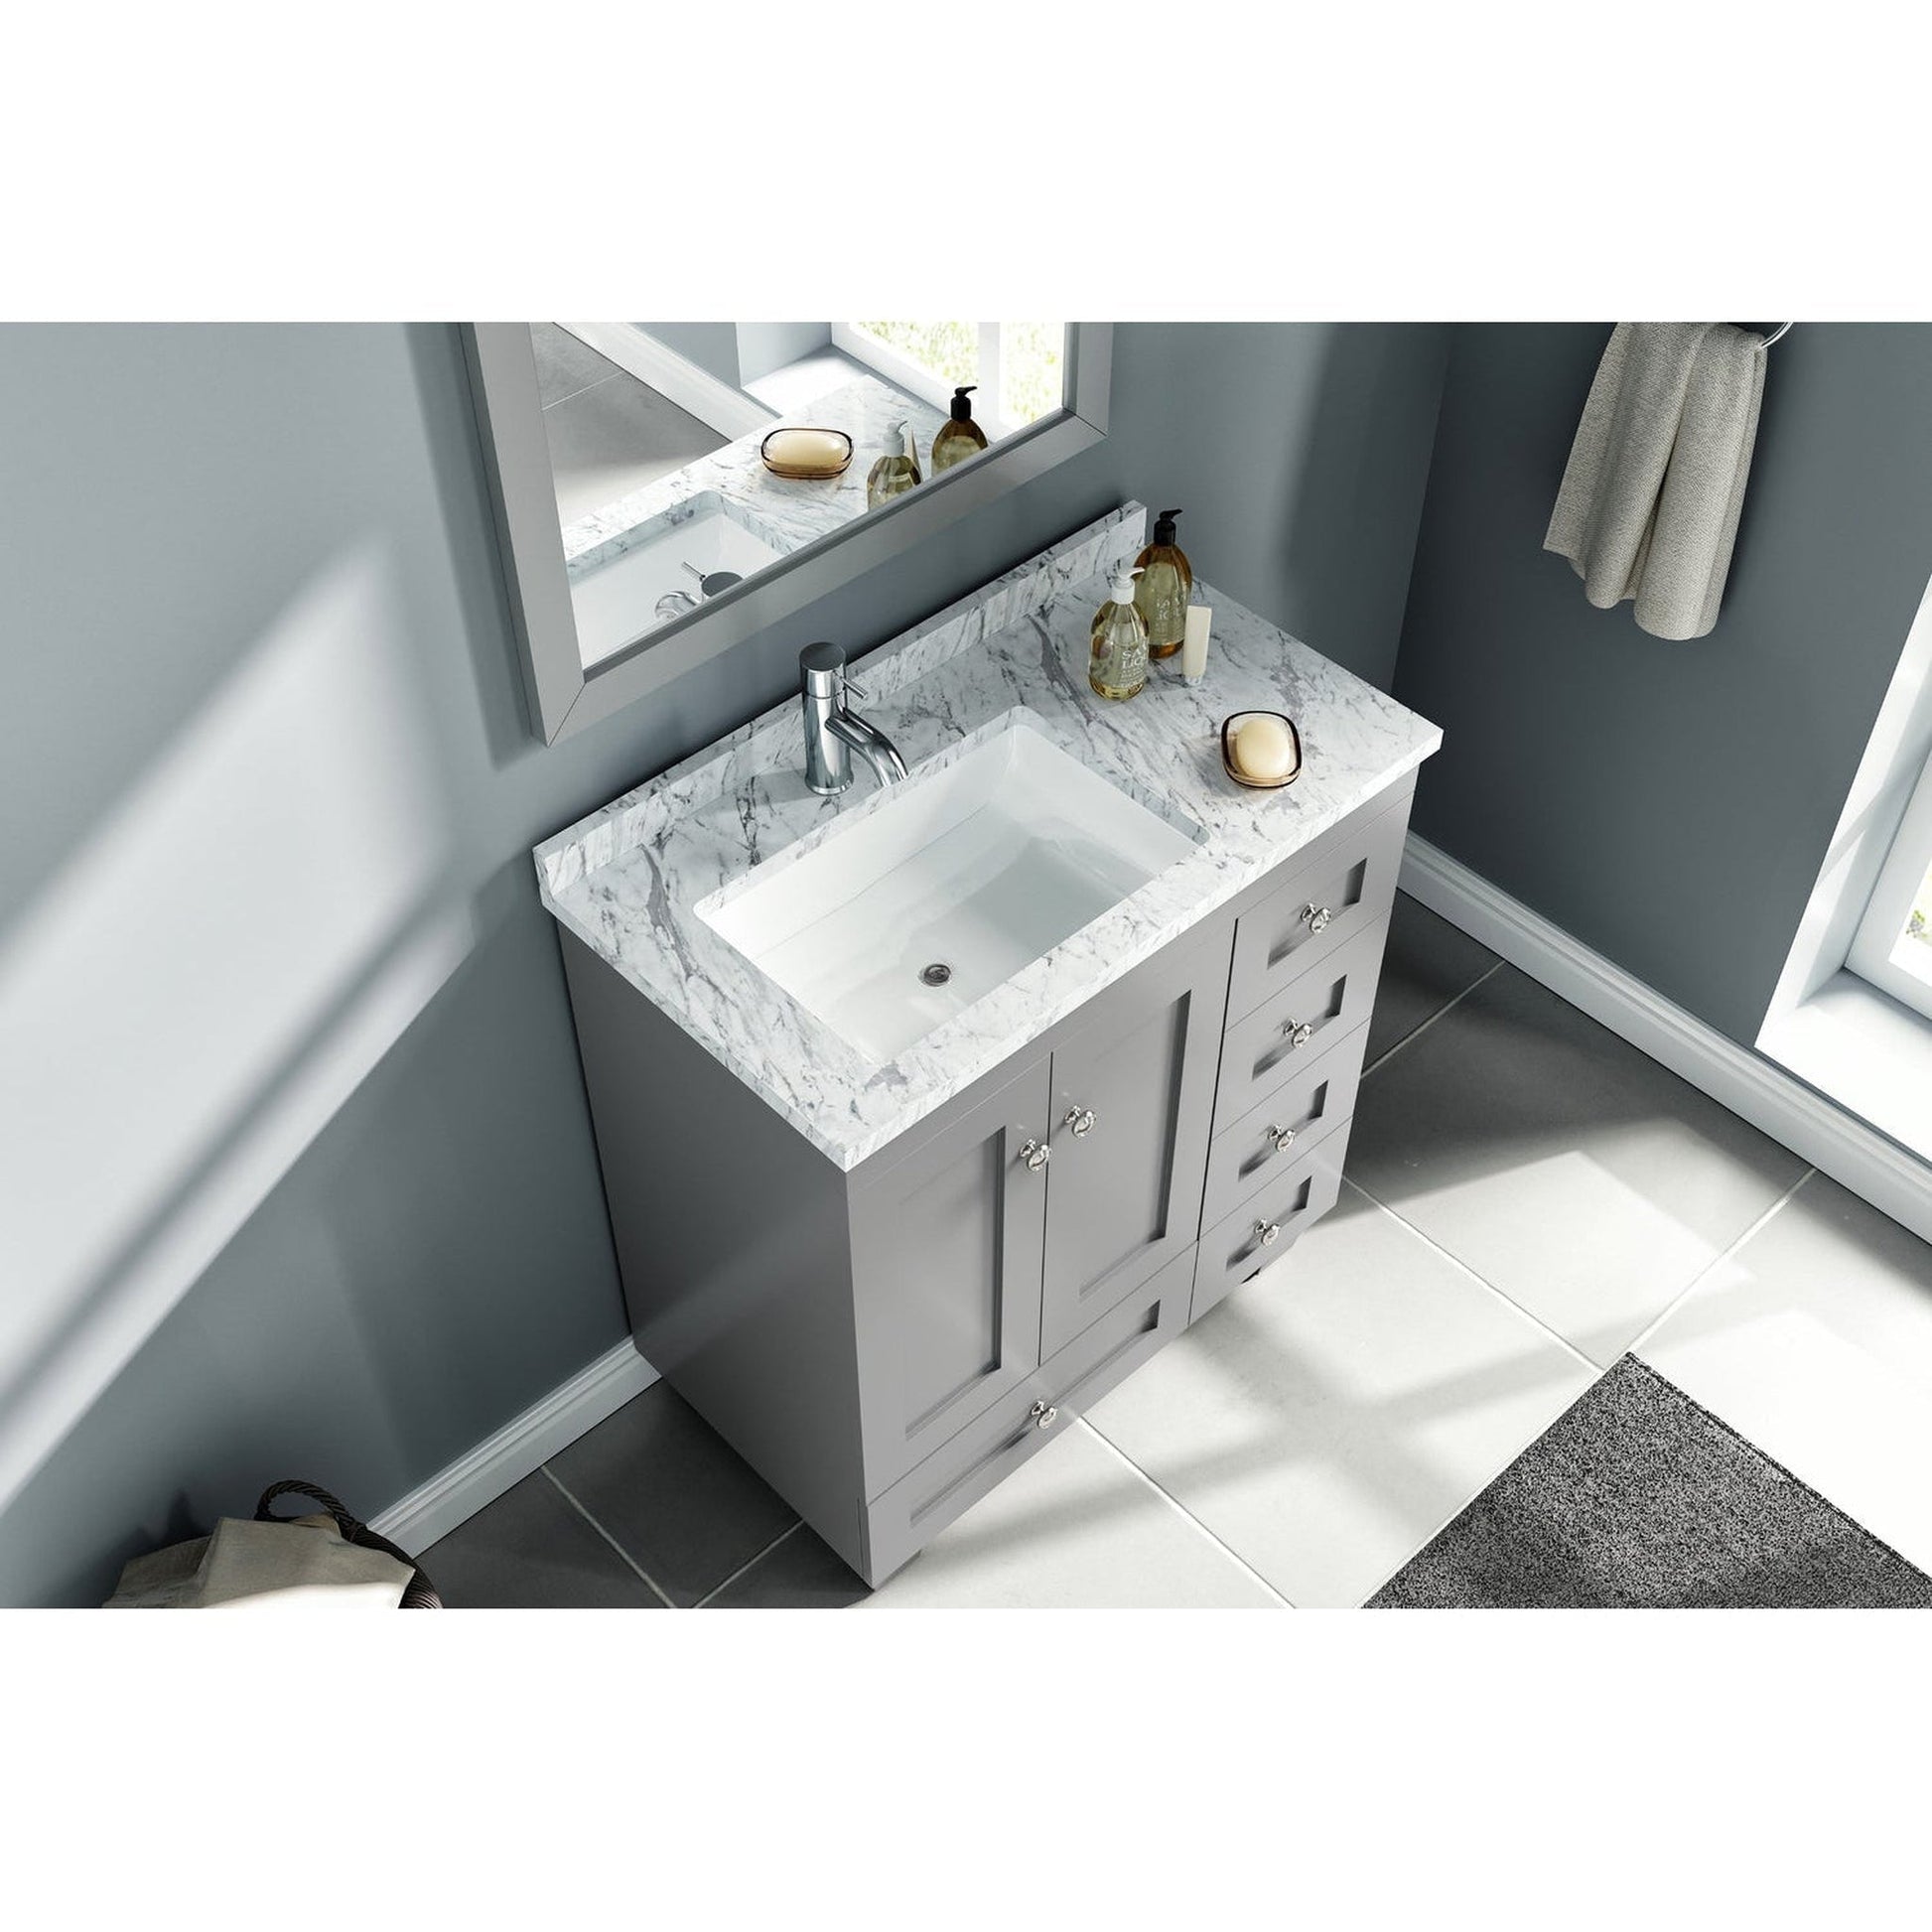 Eviva Happy 30" x 34" Gray Freestanding Bathroom Vanity With White Carrara Marble Top and Single Undermount Porcelain Sink